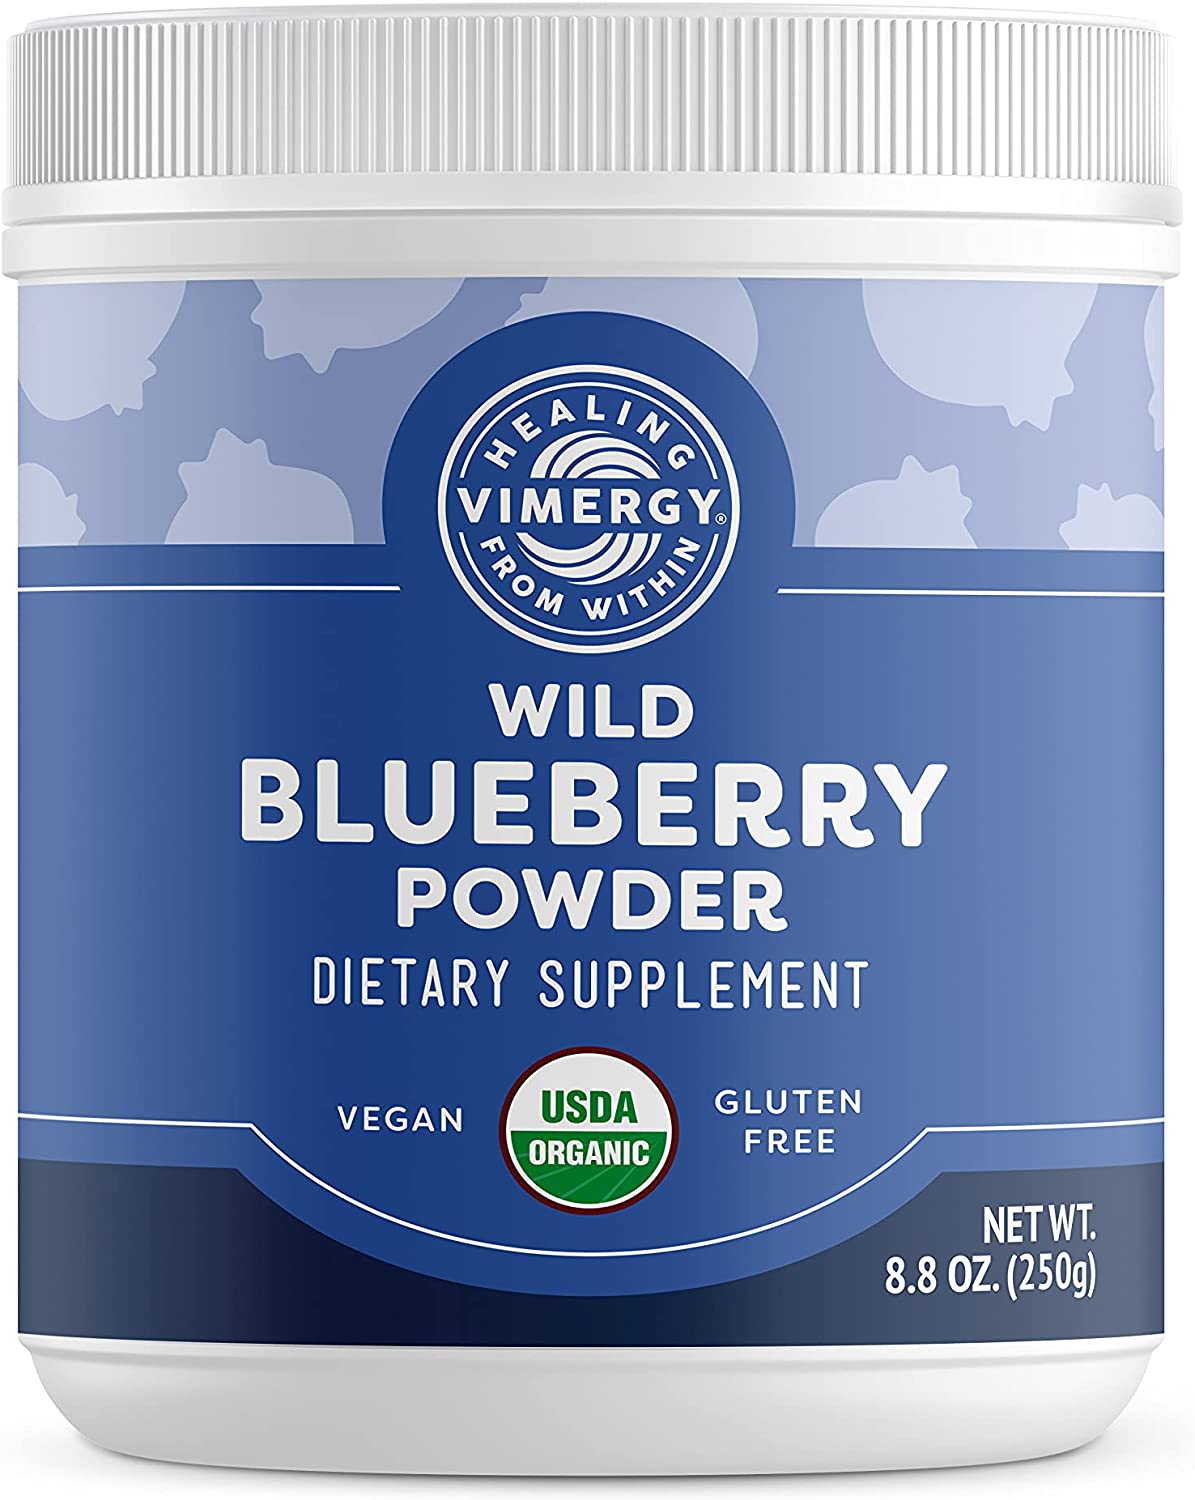 VIMERGY Wild Blueberry Supplement - The Benefits of Eating Blueberries